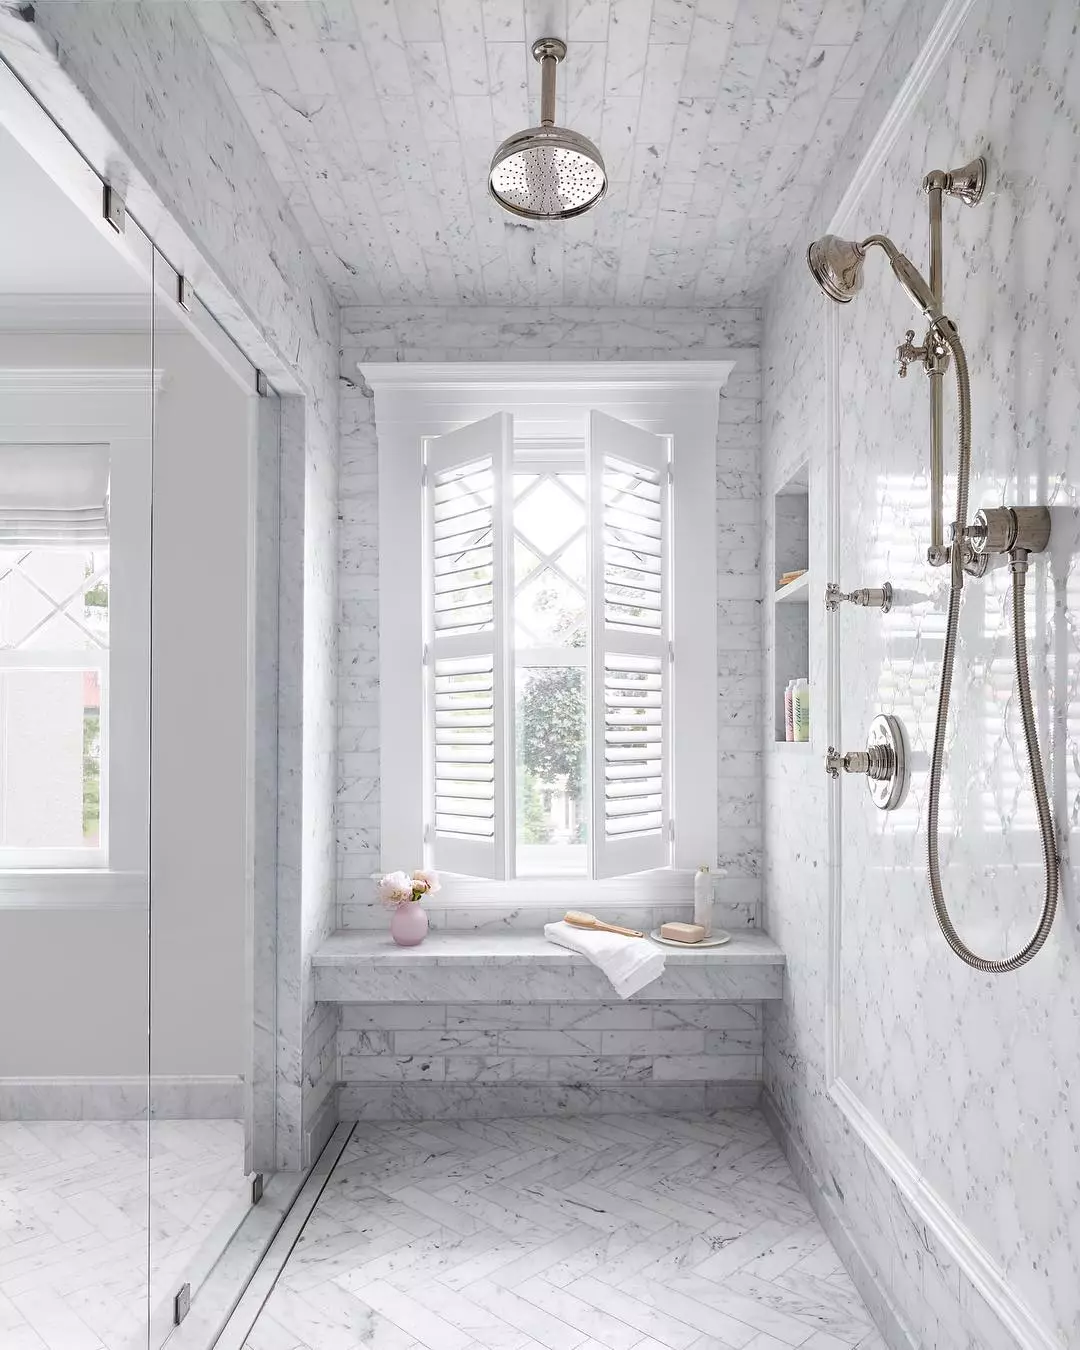 https://www.extraspace.com/blog/wp-content/uploads/2018/09/bathroom-remodel-ways-to-upgrade-your-space-include-a-shower-bench.jpg.webp